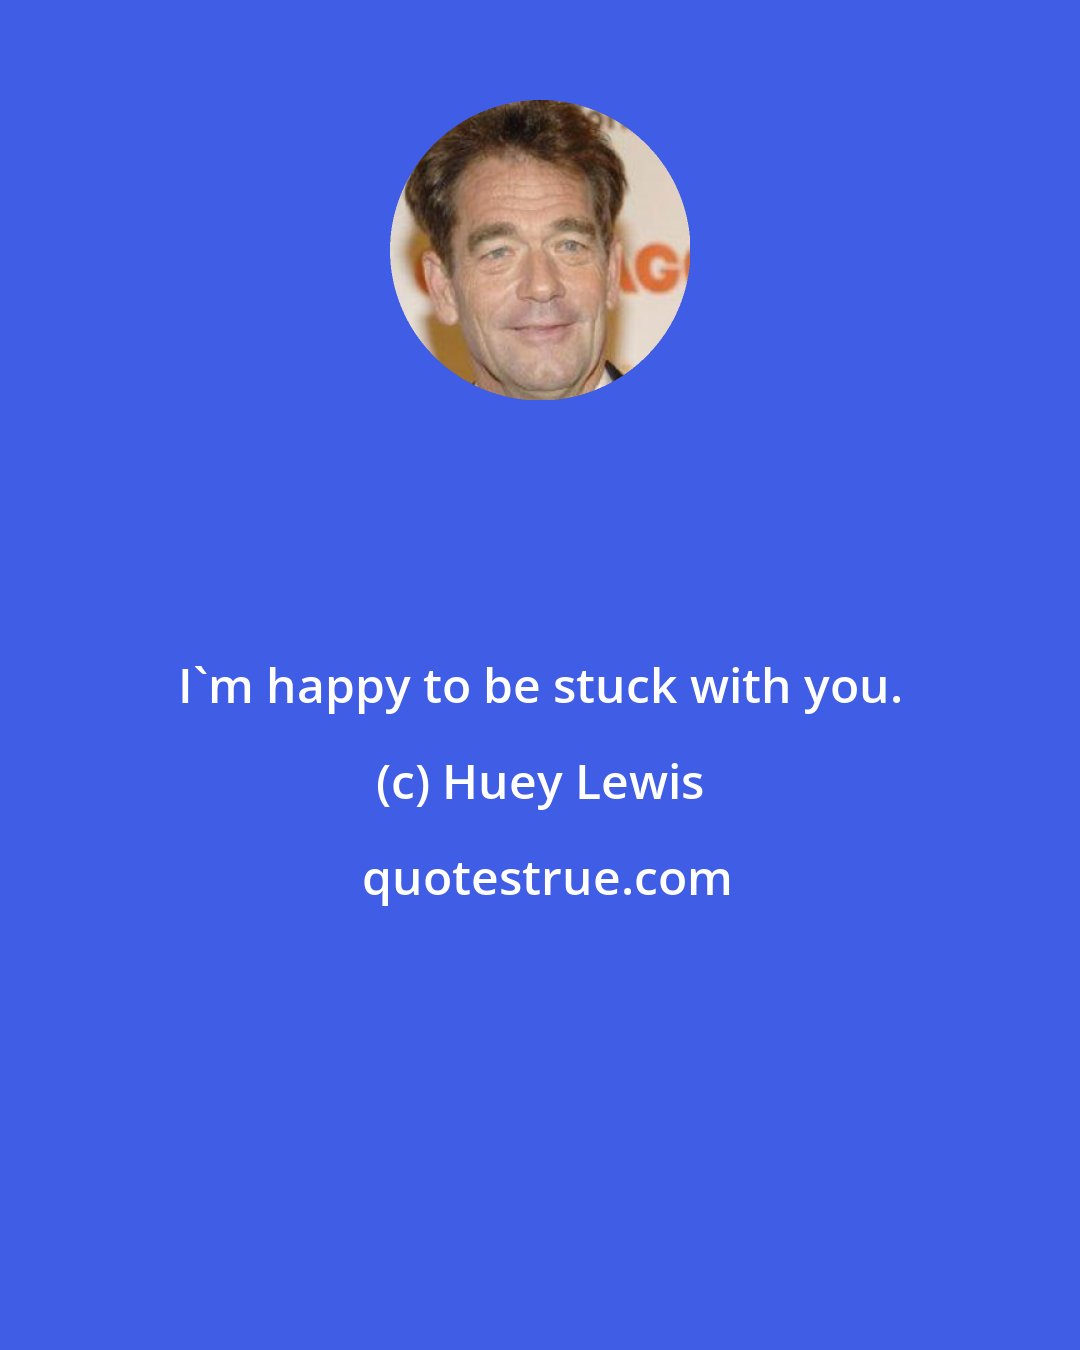 Huey Lewis: I'm happy to be stuck with you.